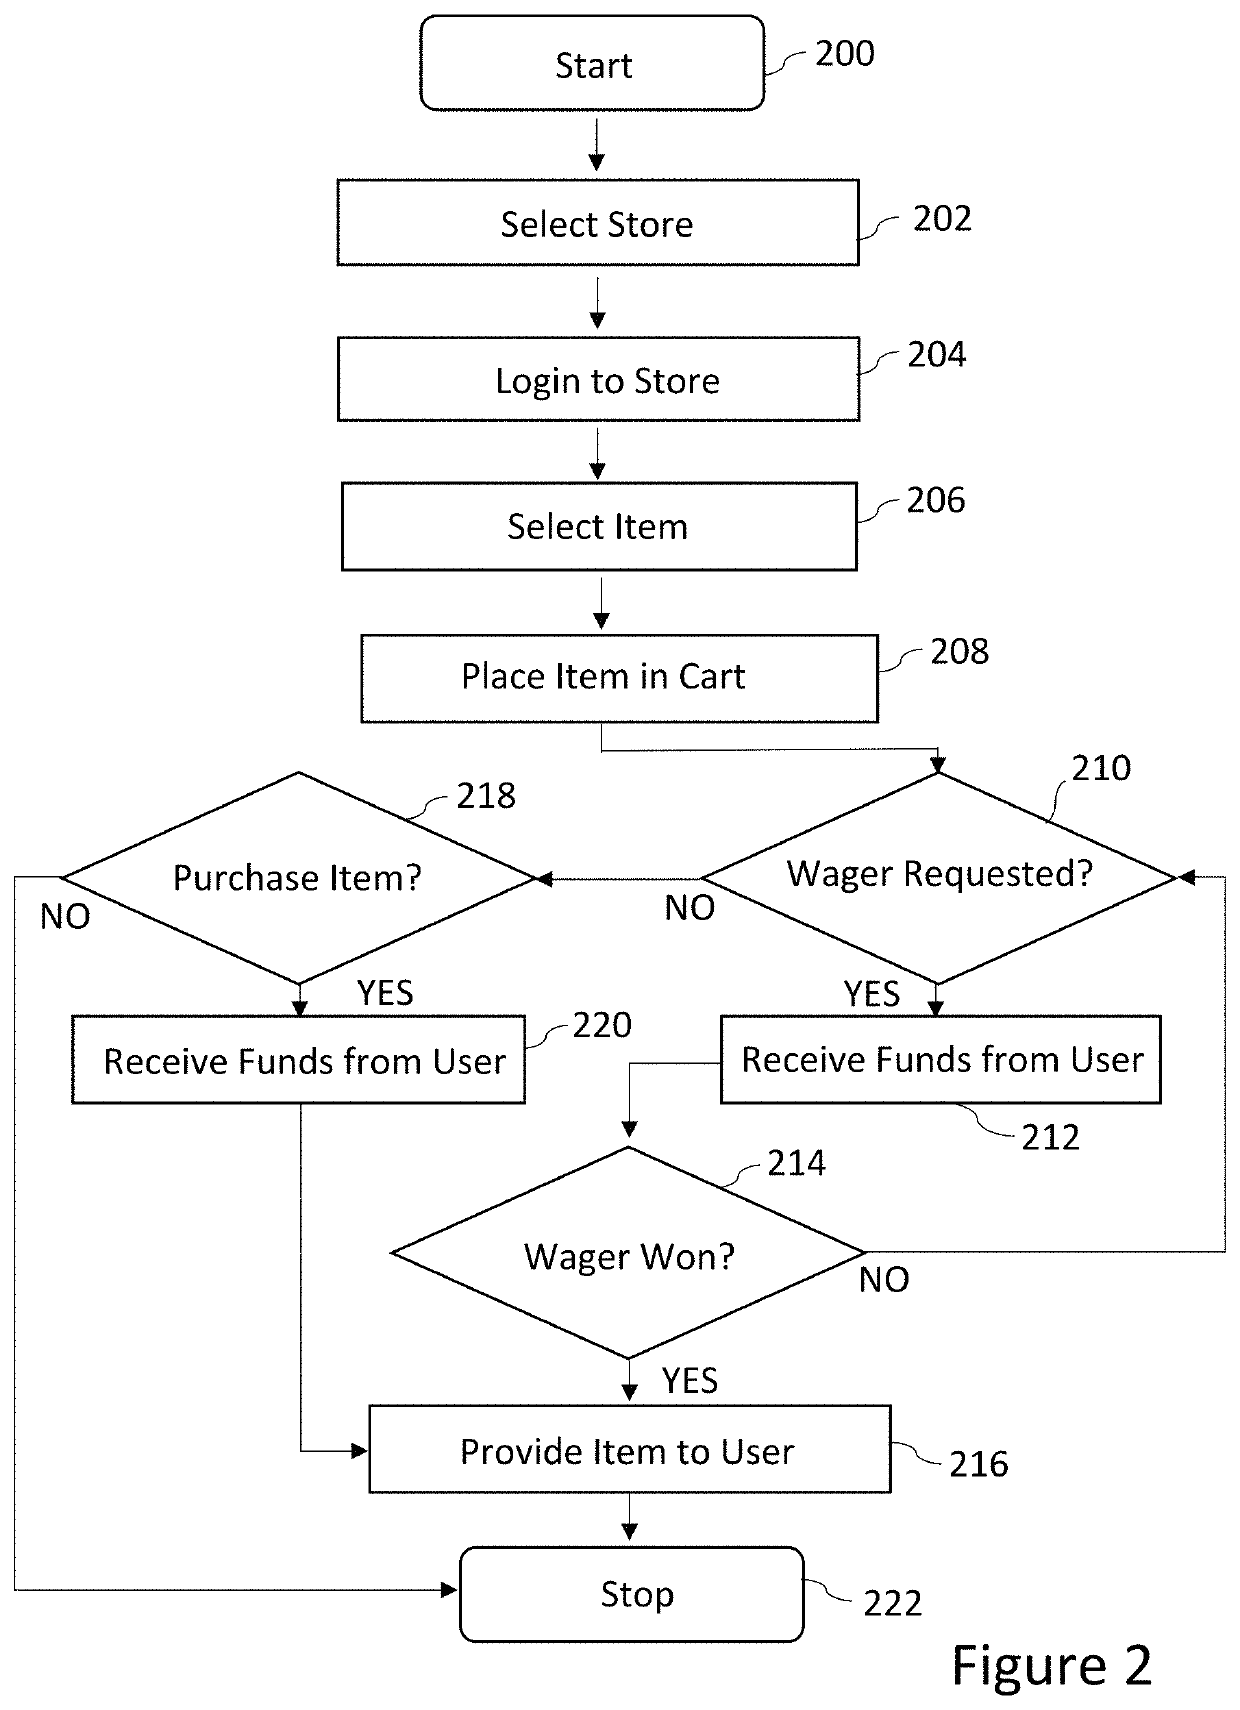 System and method for incorporating a wagering activity into an electronic commerce transaction